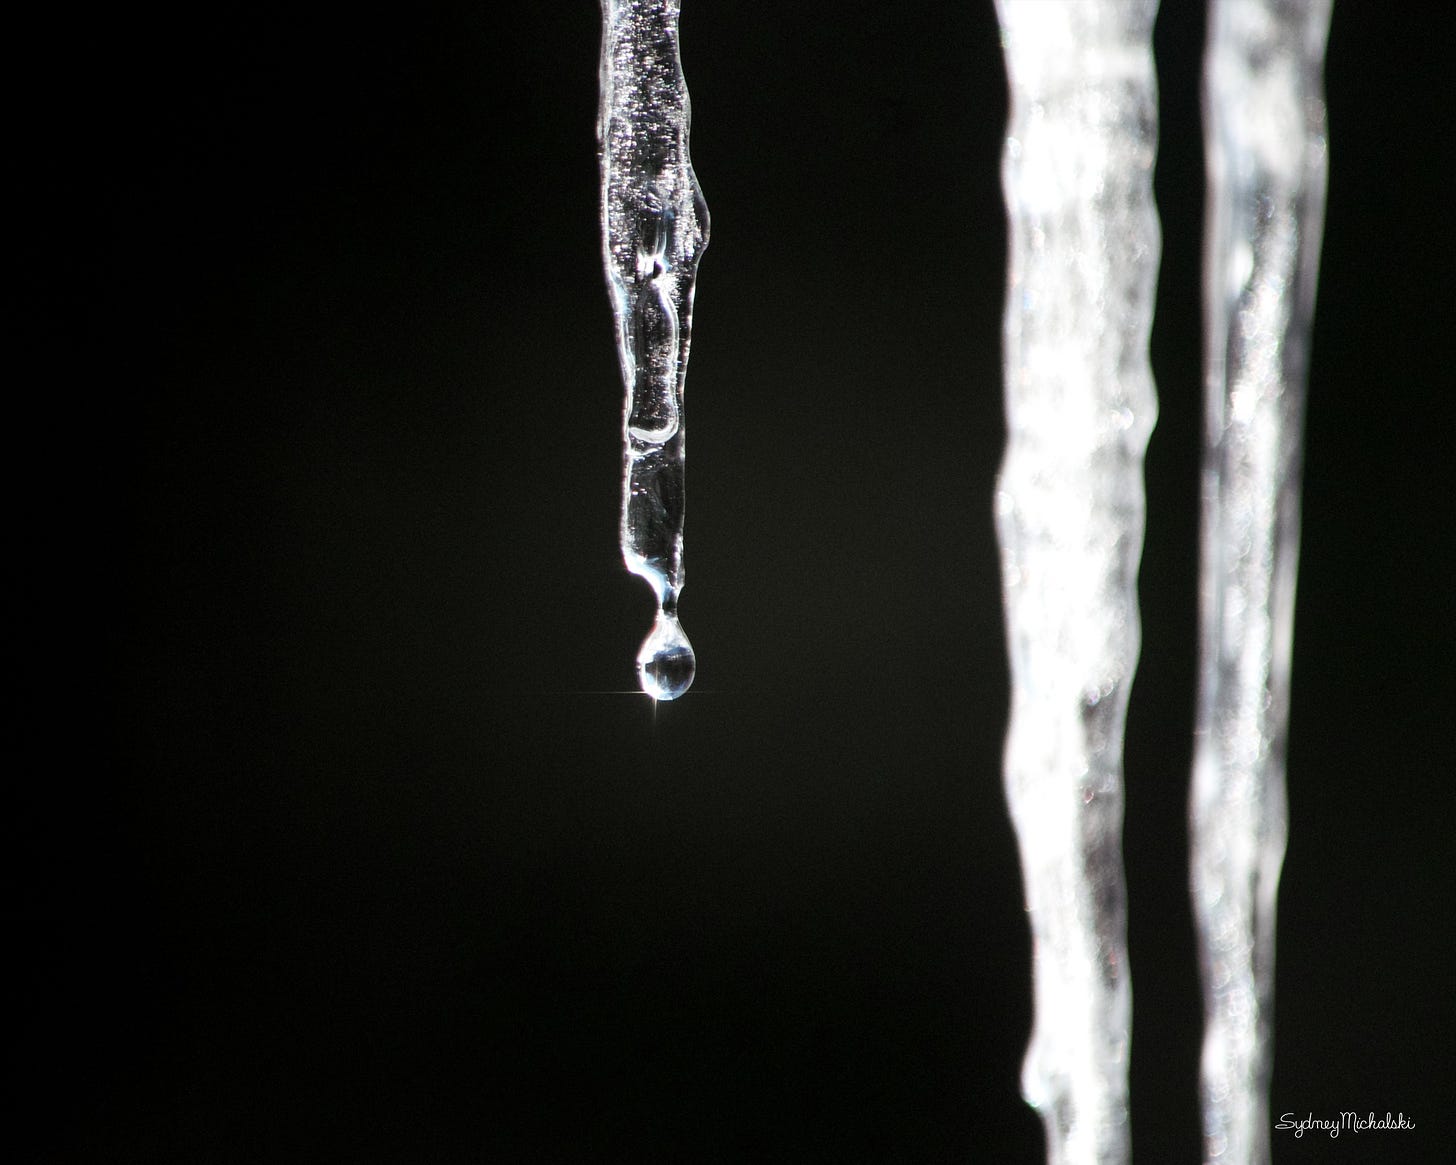 A single droplet sparkles on the end of an icicle.